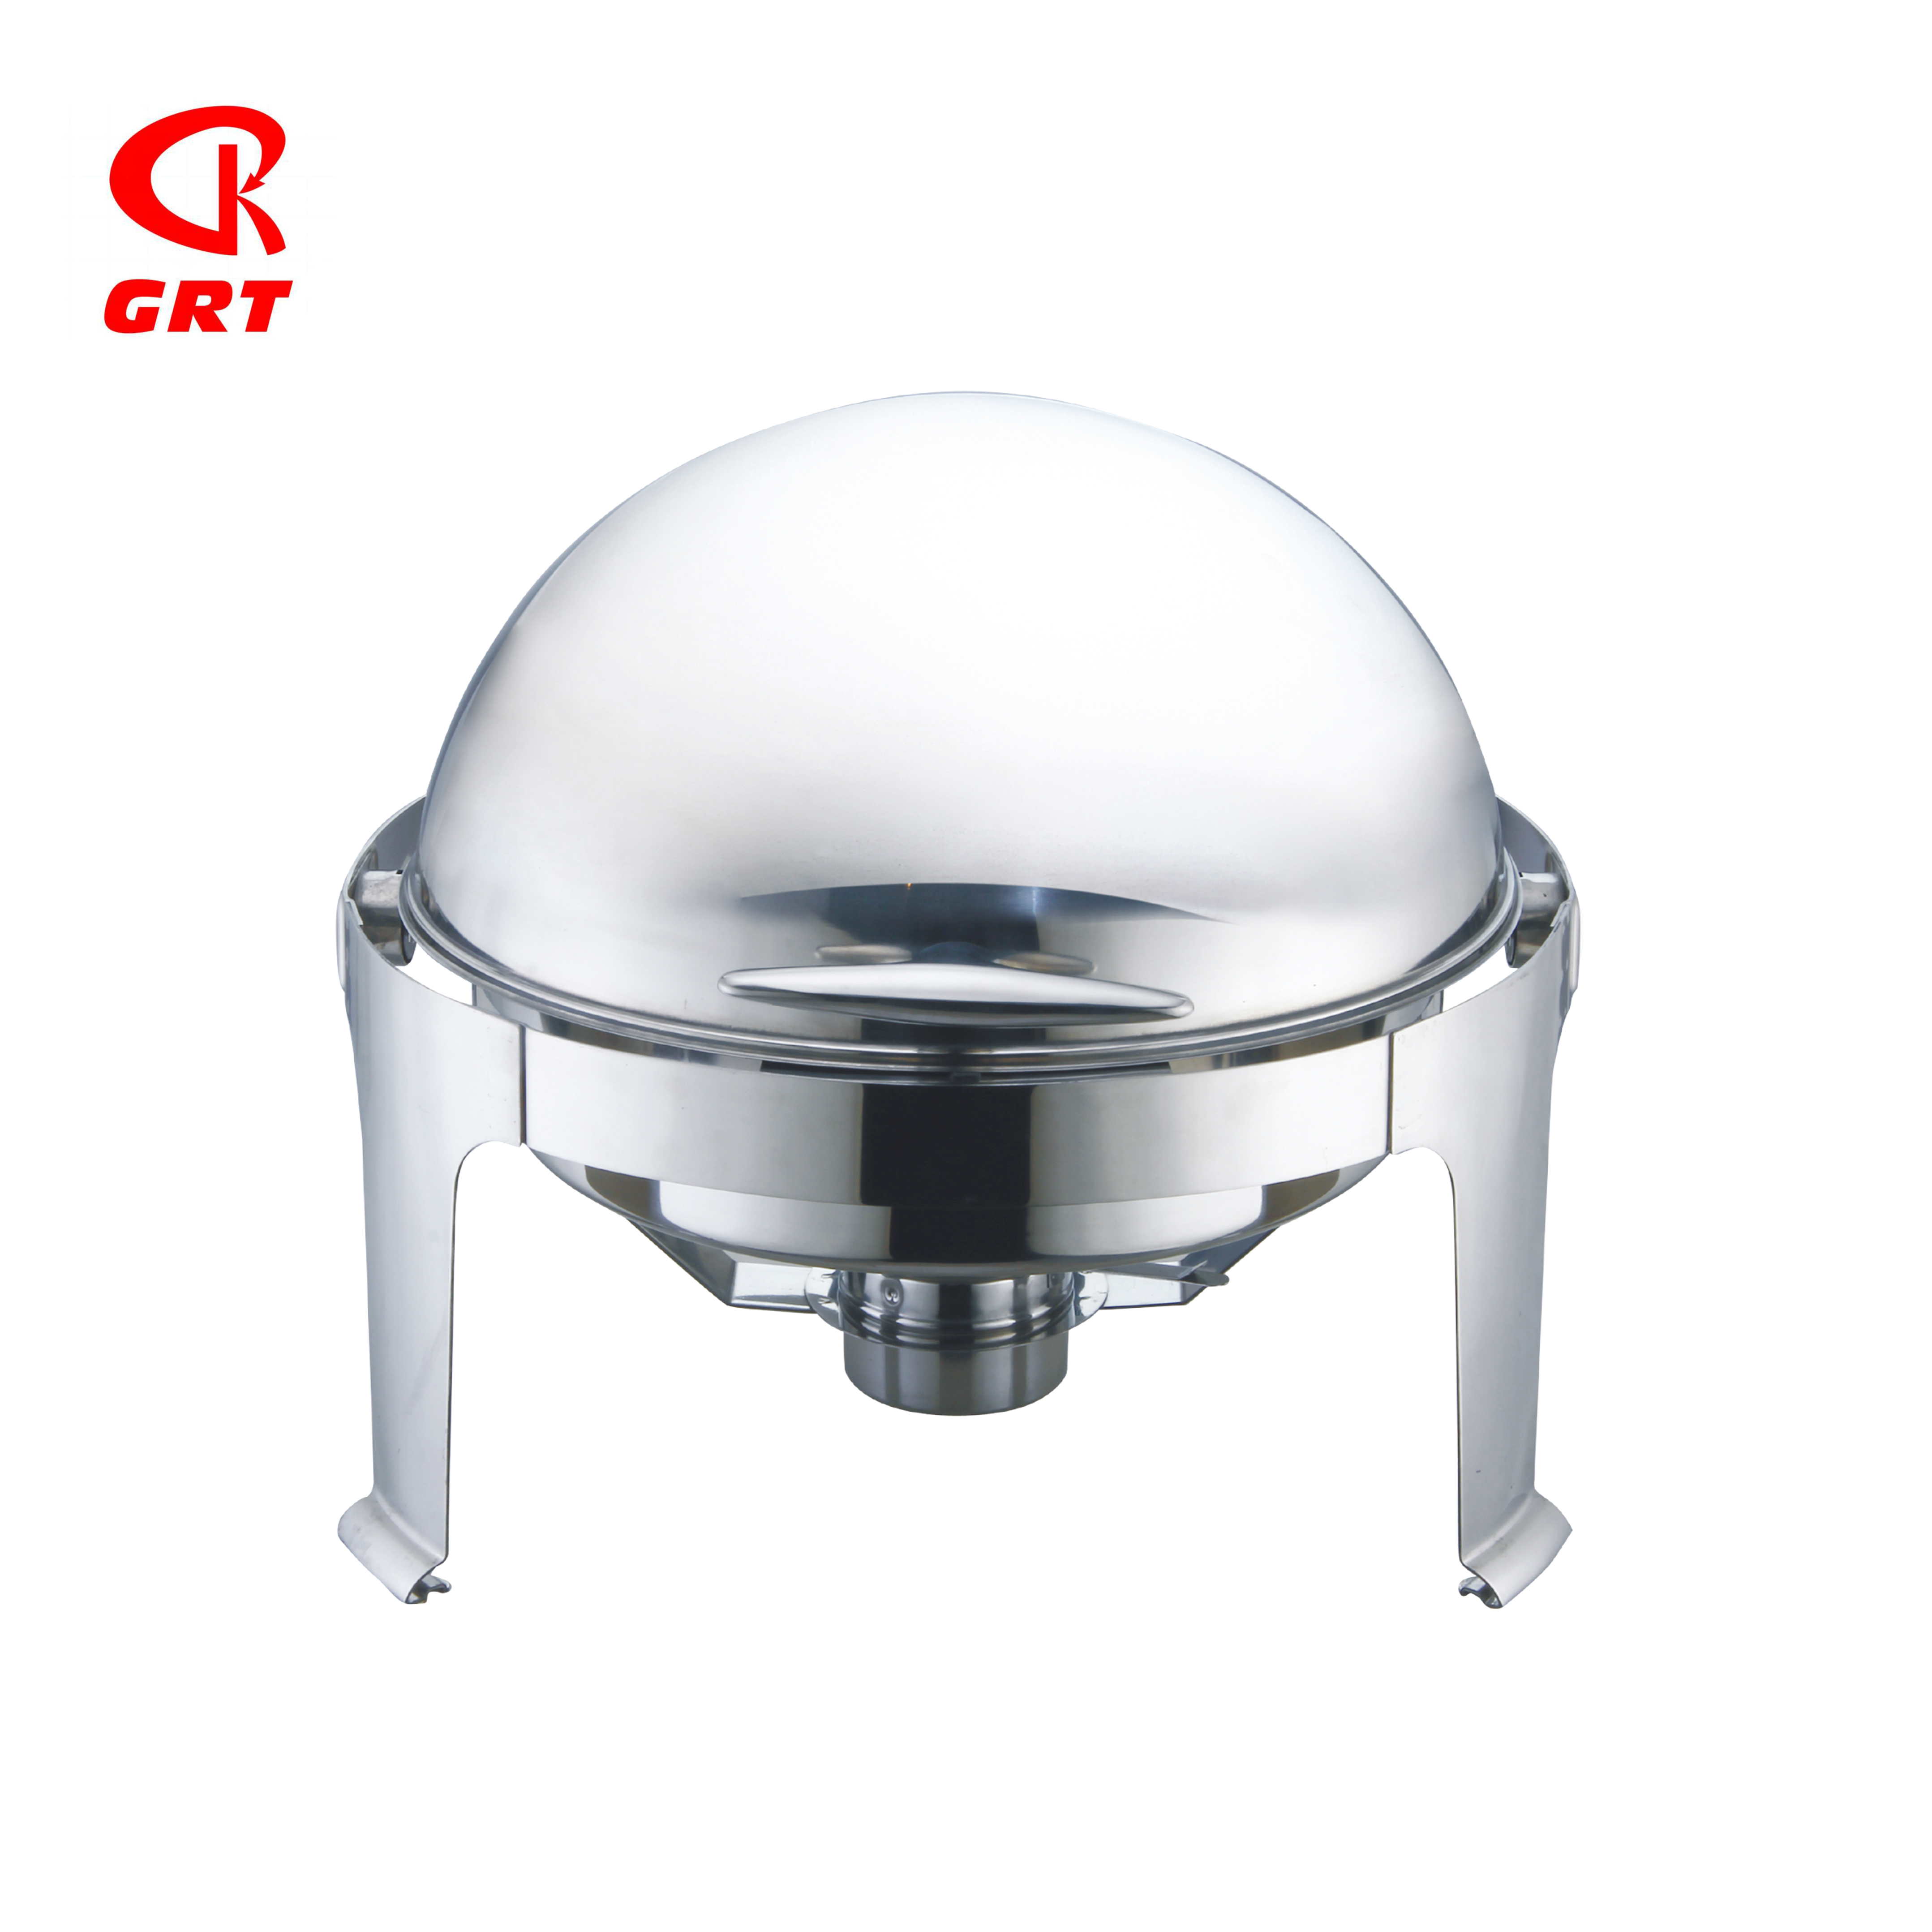 GRT-721KD Stainless Steel Stackbale Round Chafing Dish 6L 